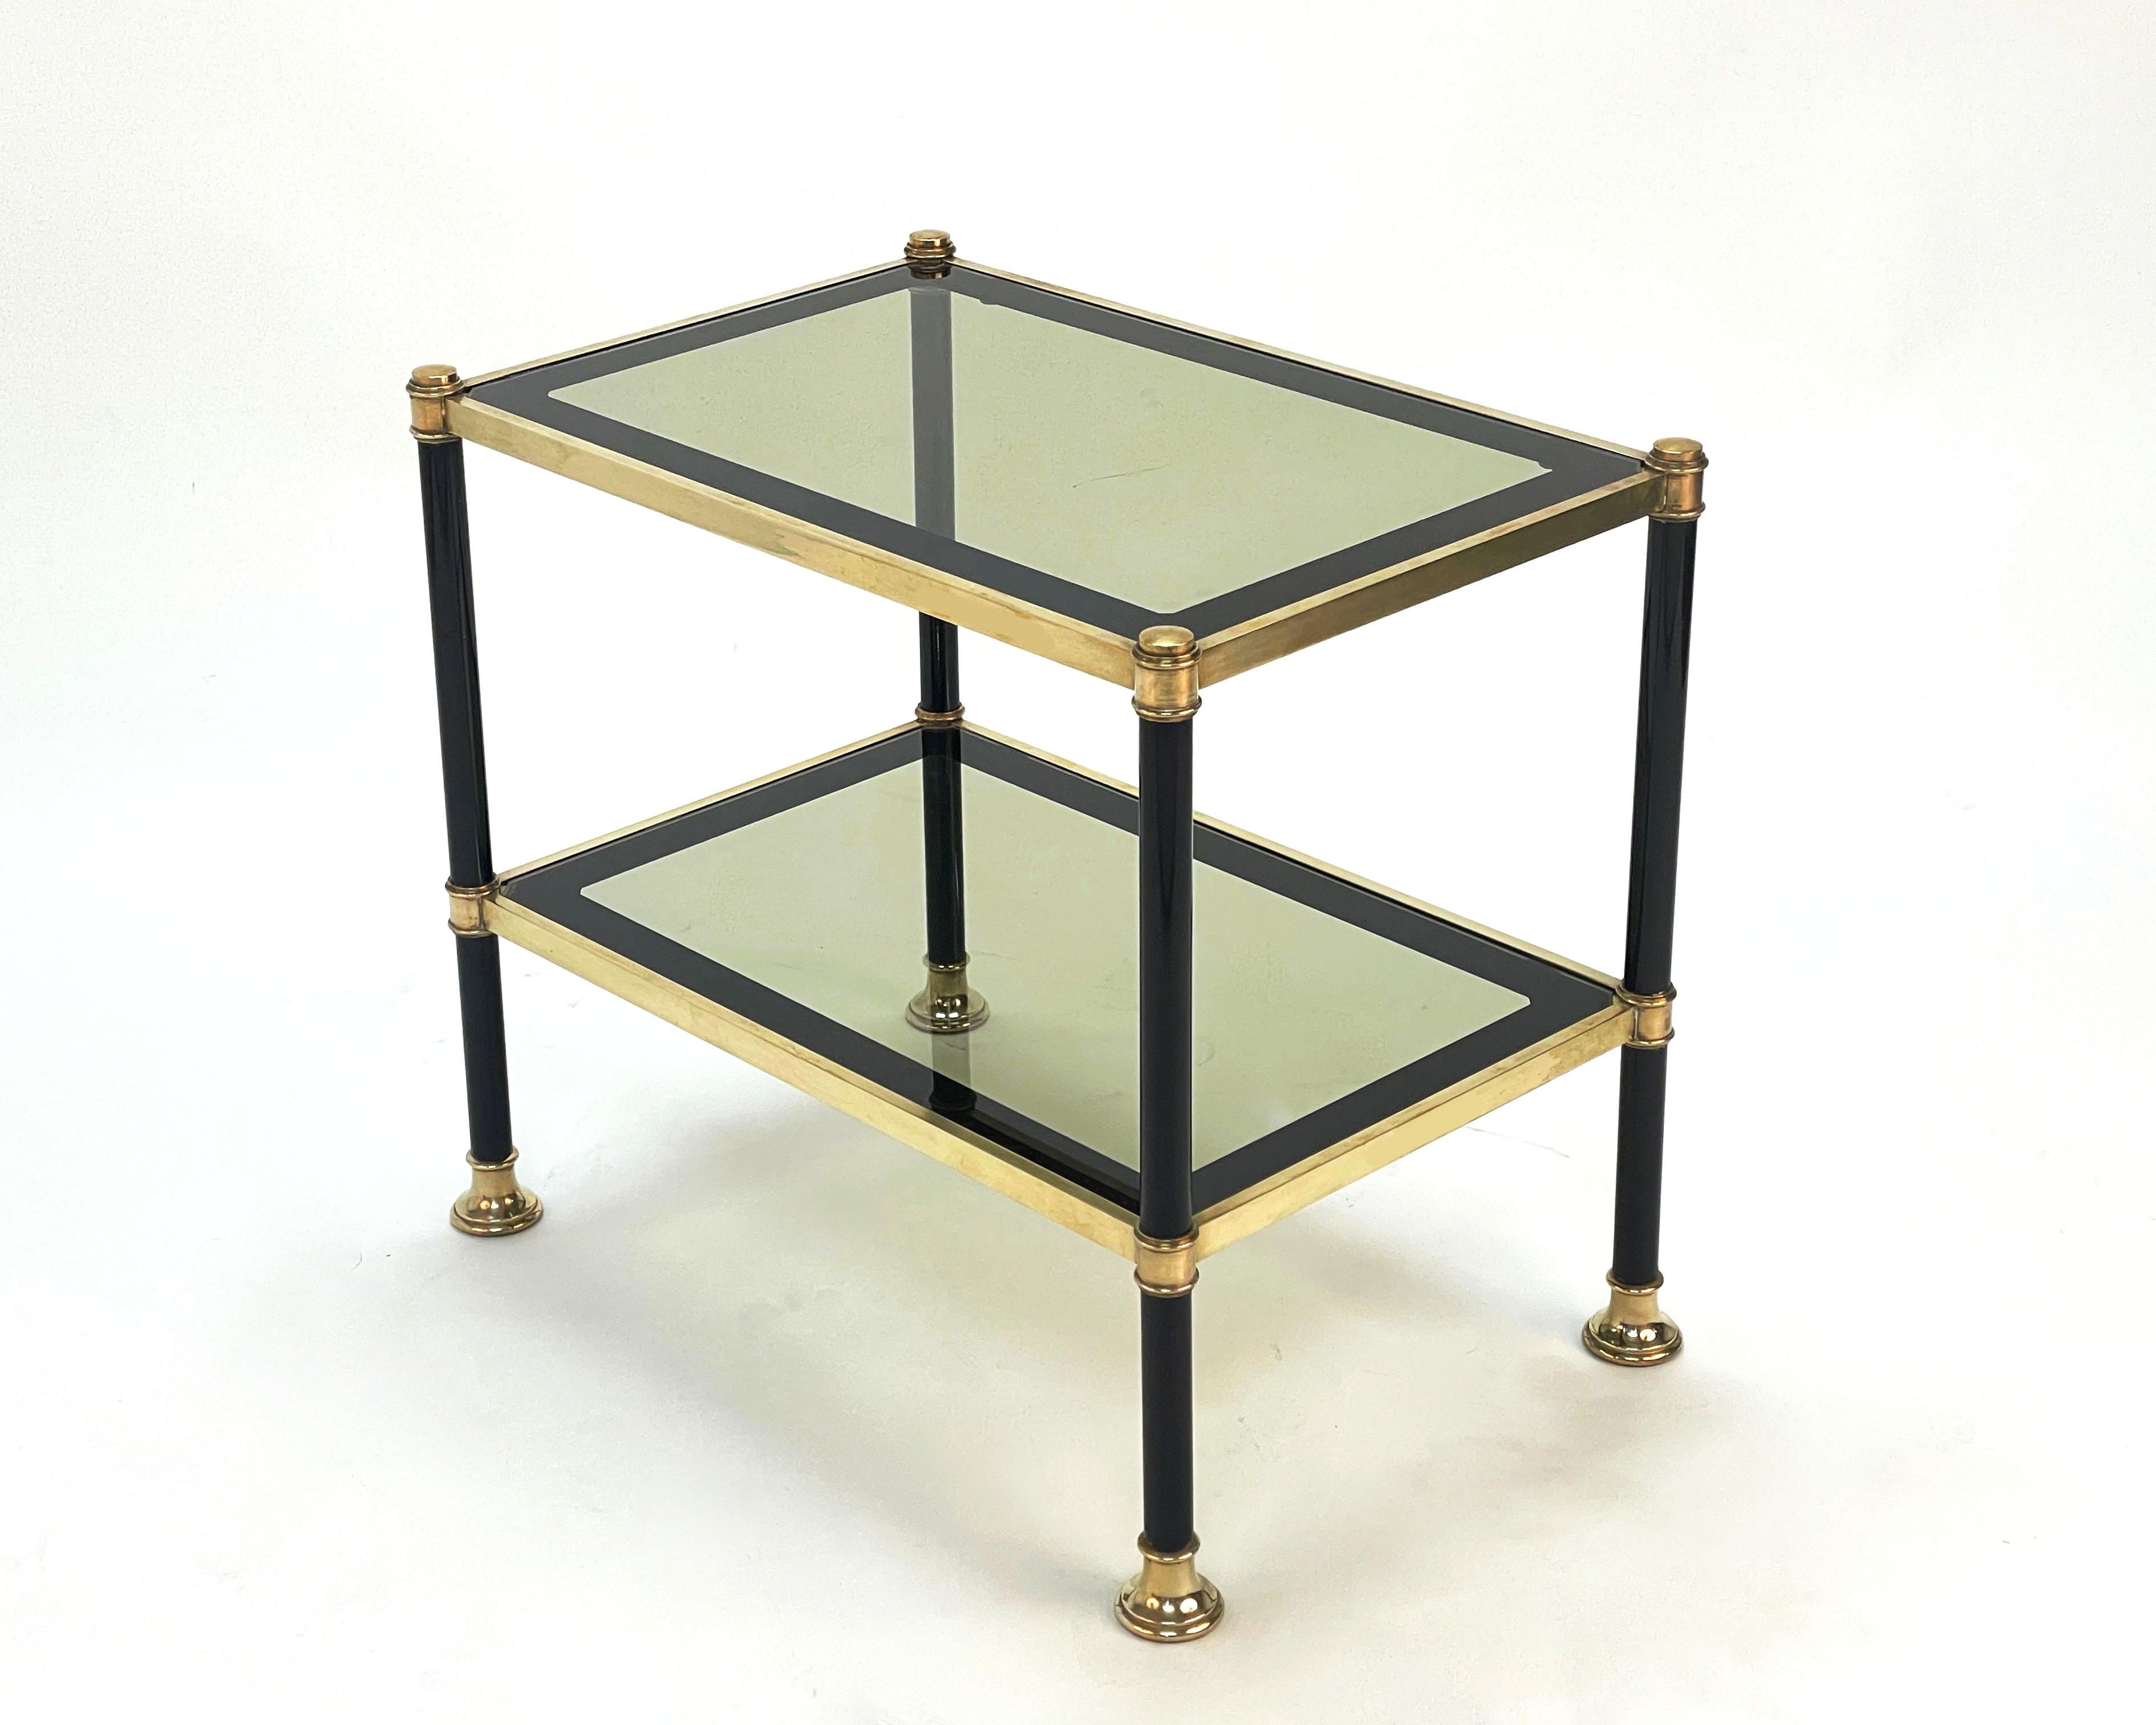 Midcentury Brass and Black Metal Rectangular Coffee Table with Smoked Glass 1970 For Sale 2